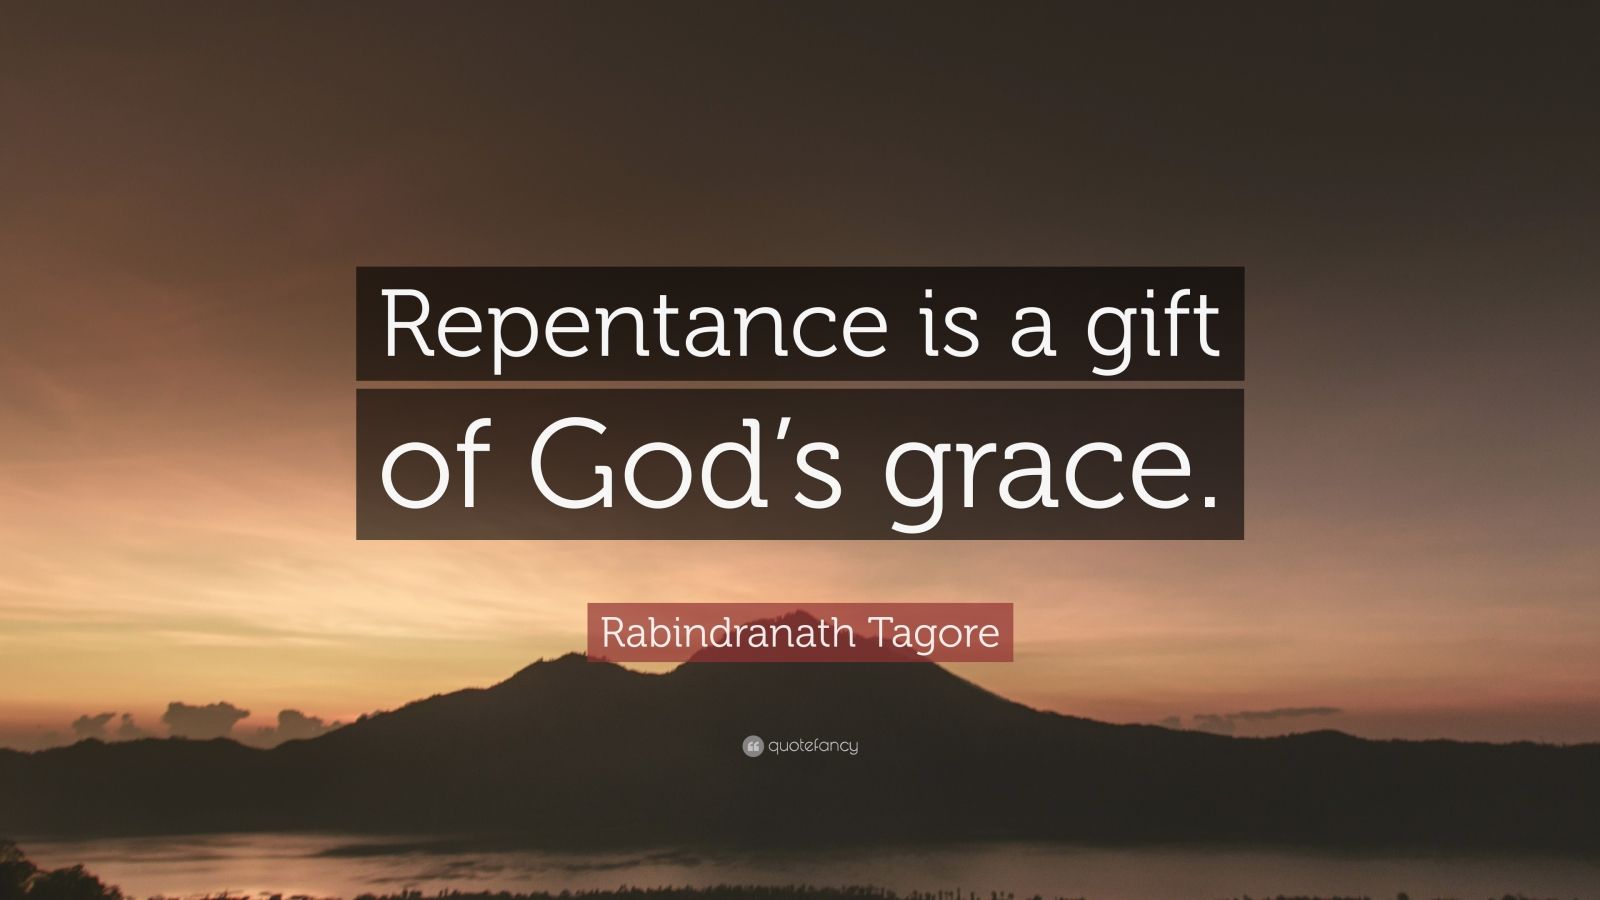 Rabindranath Tagore Quote “Repentance is a gift of God’s